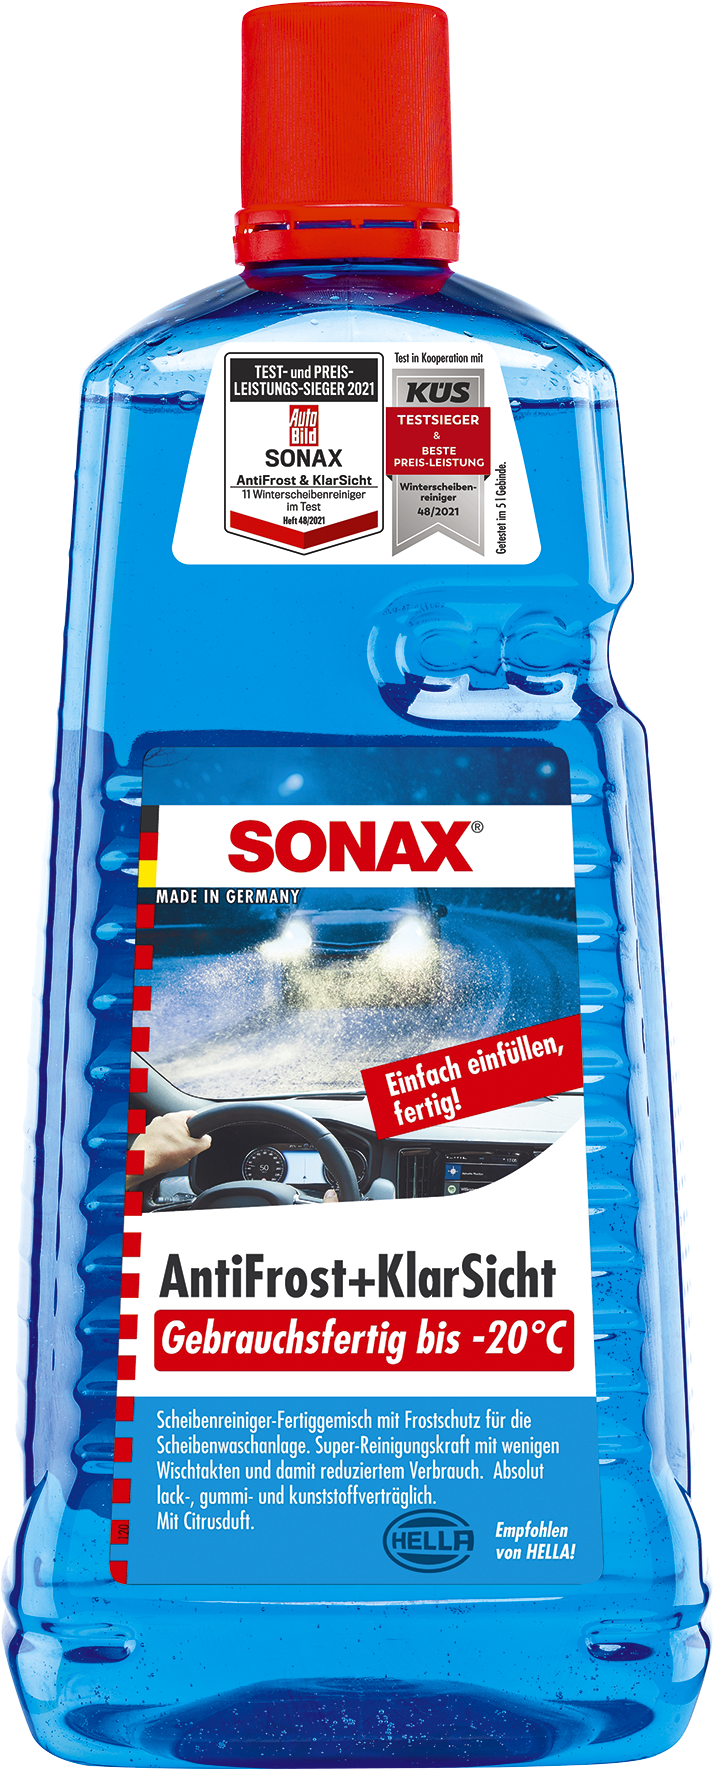 Product image download - SONAX Media - site 3